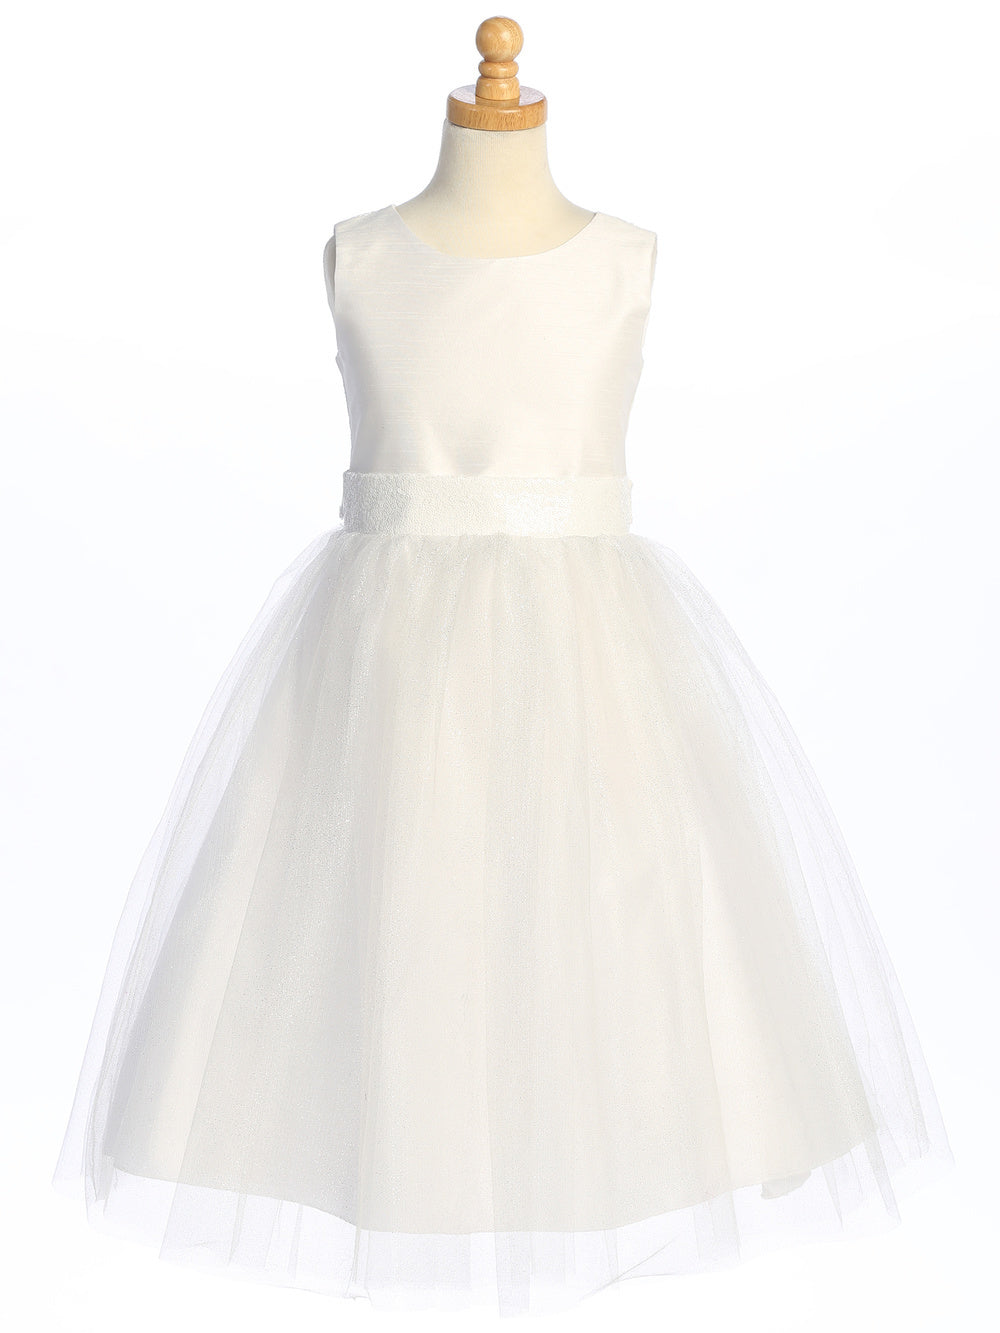 Shimmering tulle and sequins adorn a flower girl's white shantung dress.